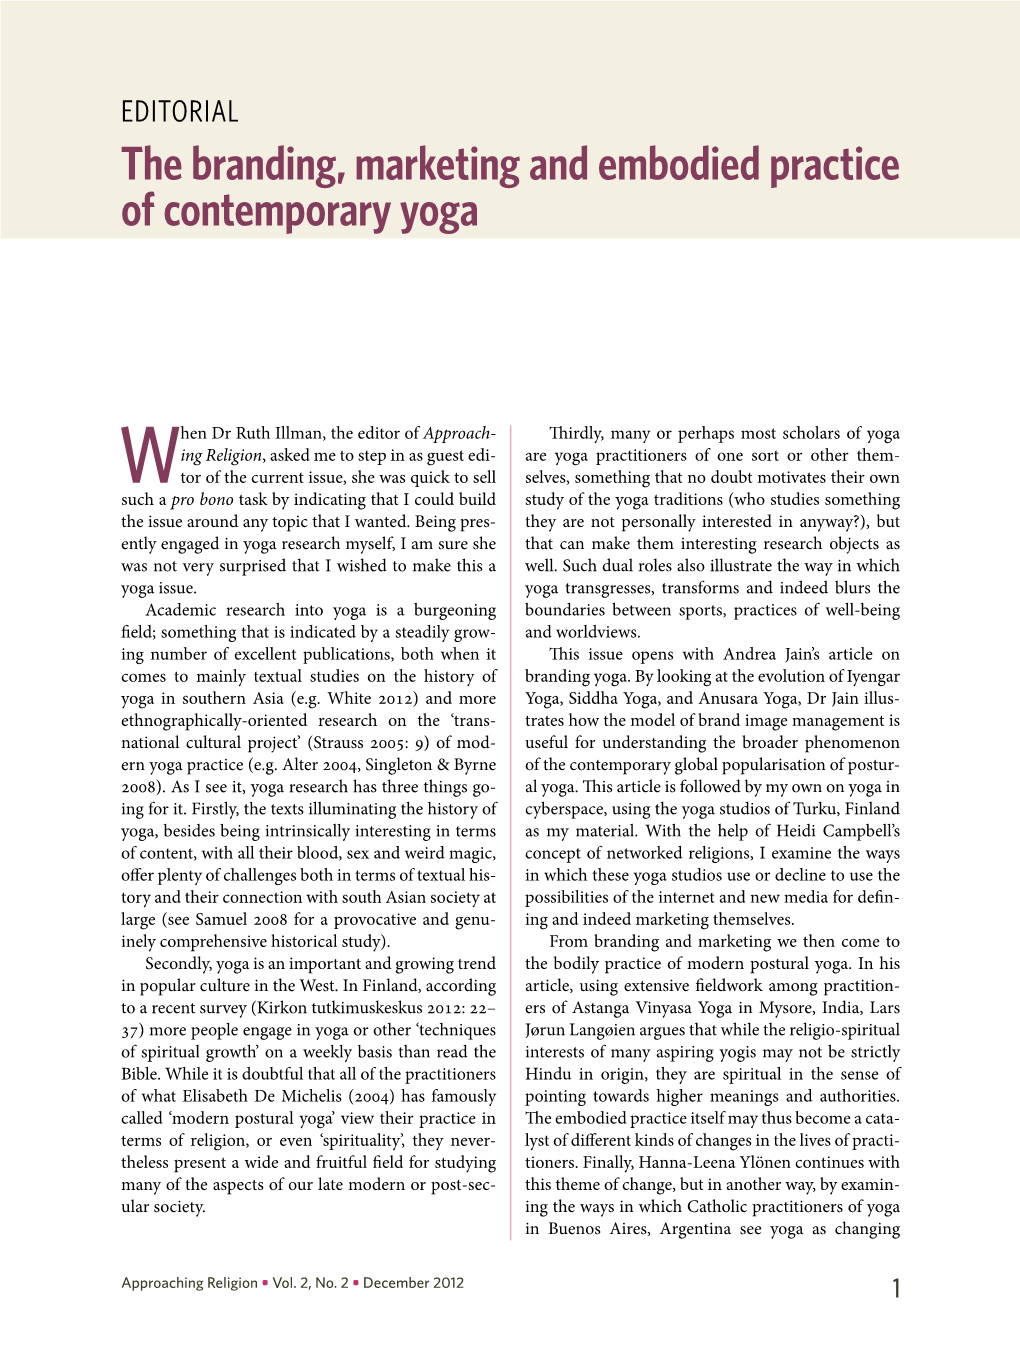 The Branding, Marketing and Embodied Practice of Contemporary Yoga